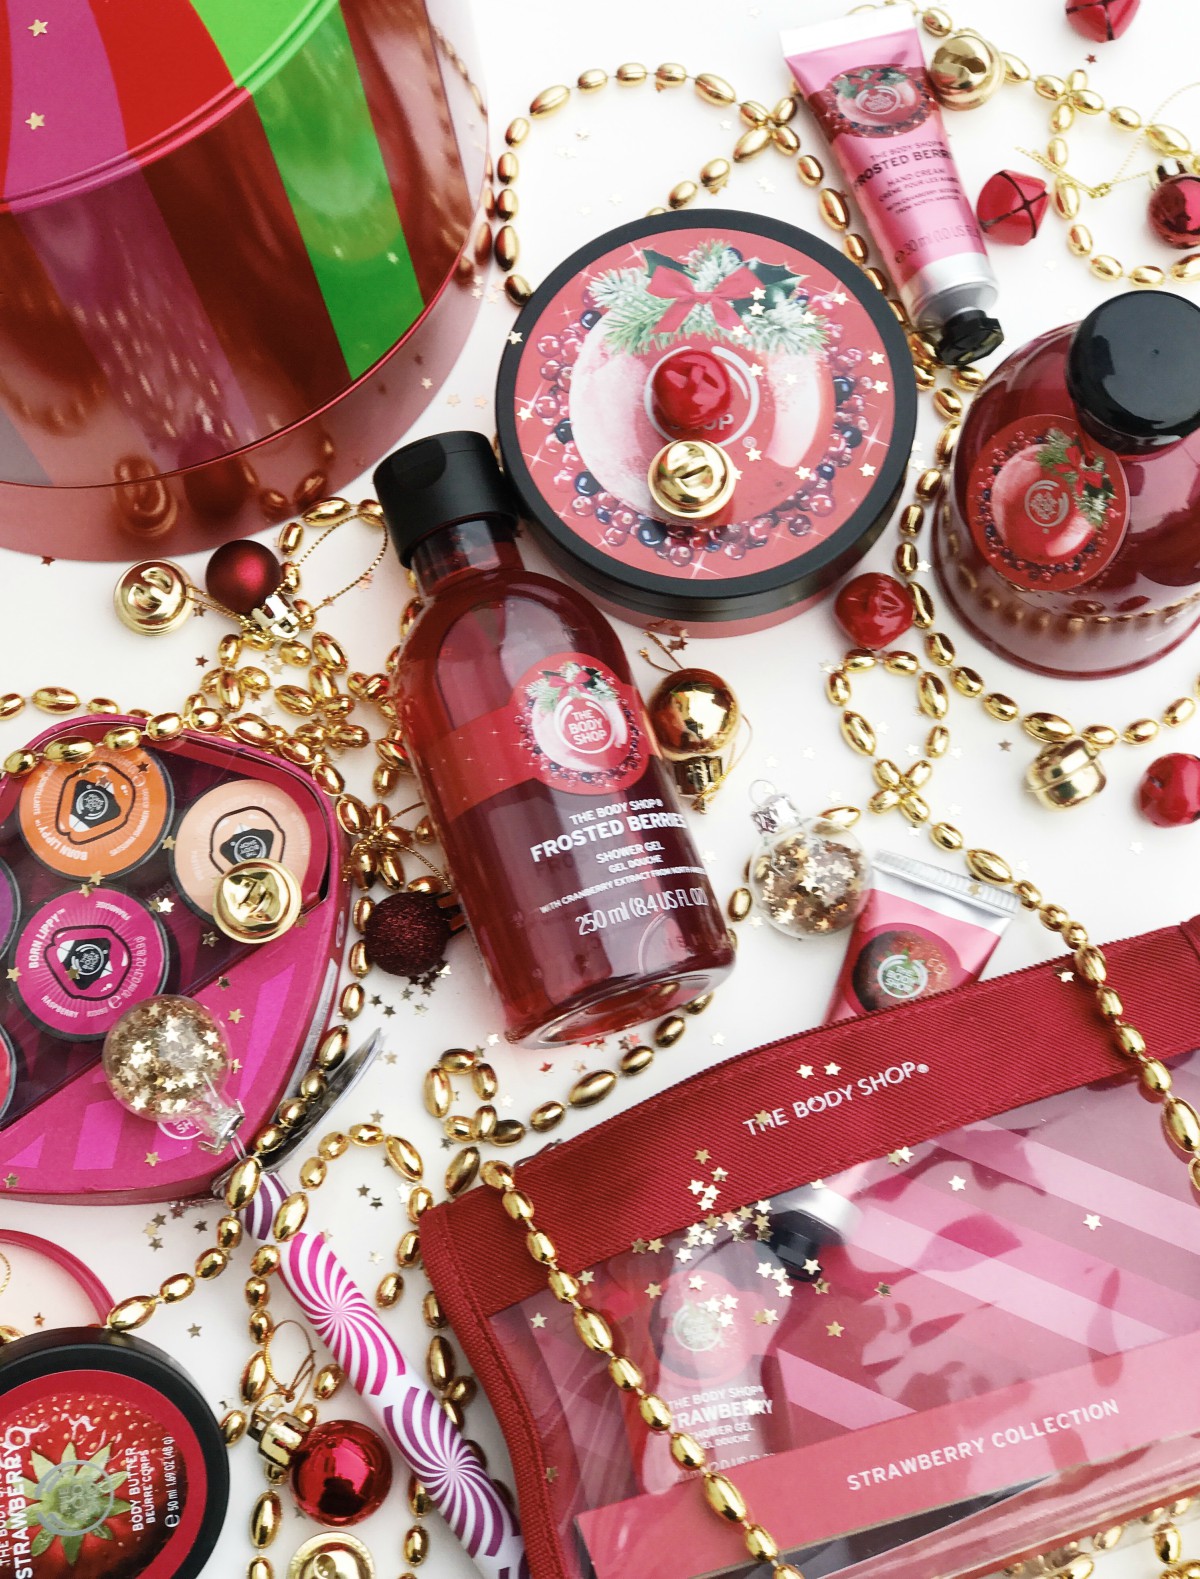 A Berry Merry Christmas with The Body Shop